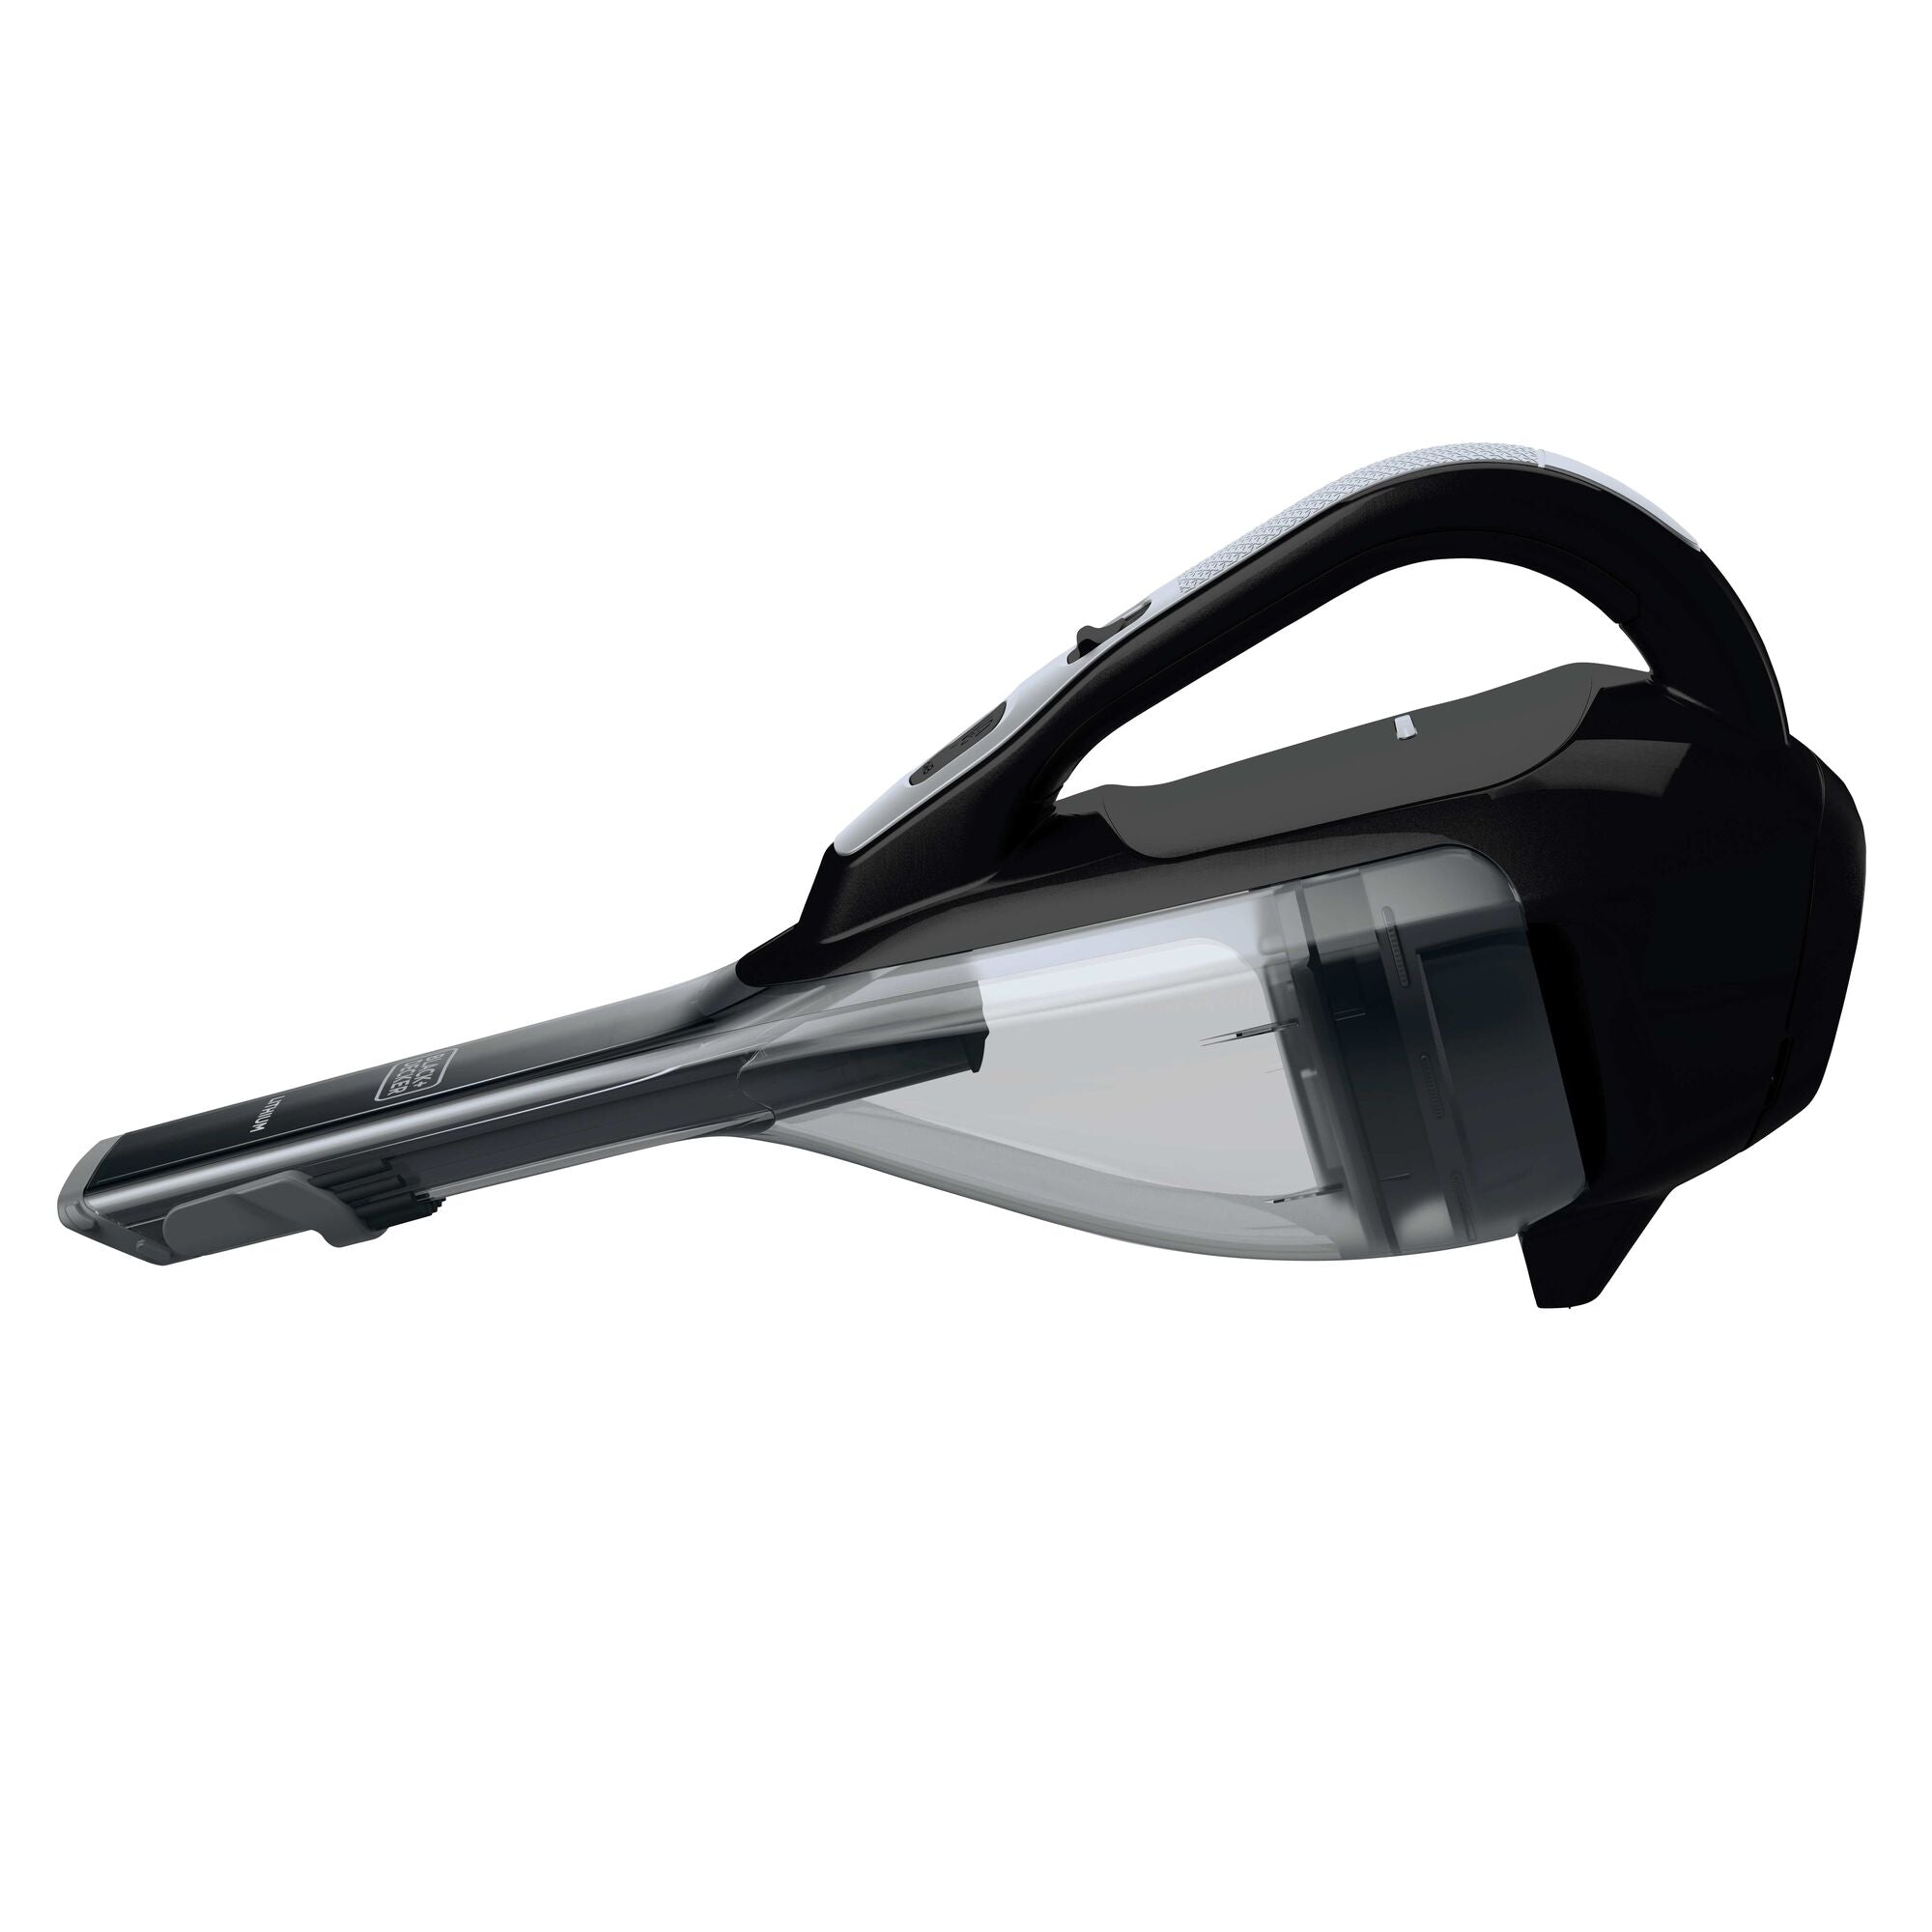 ✓ How To Use Black and Decker Dustbuster Flex Lithium Hand Vacuum